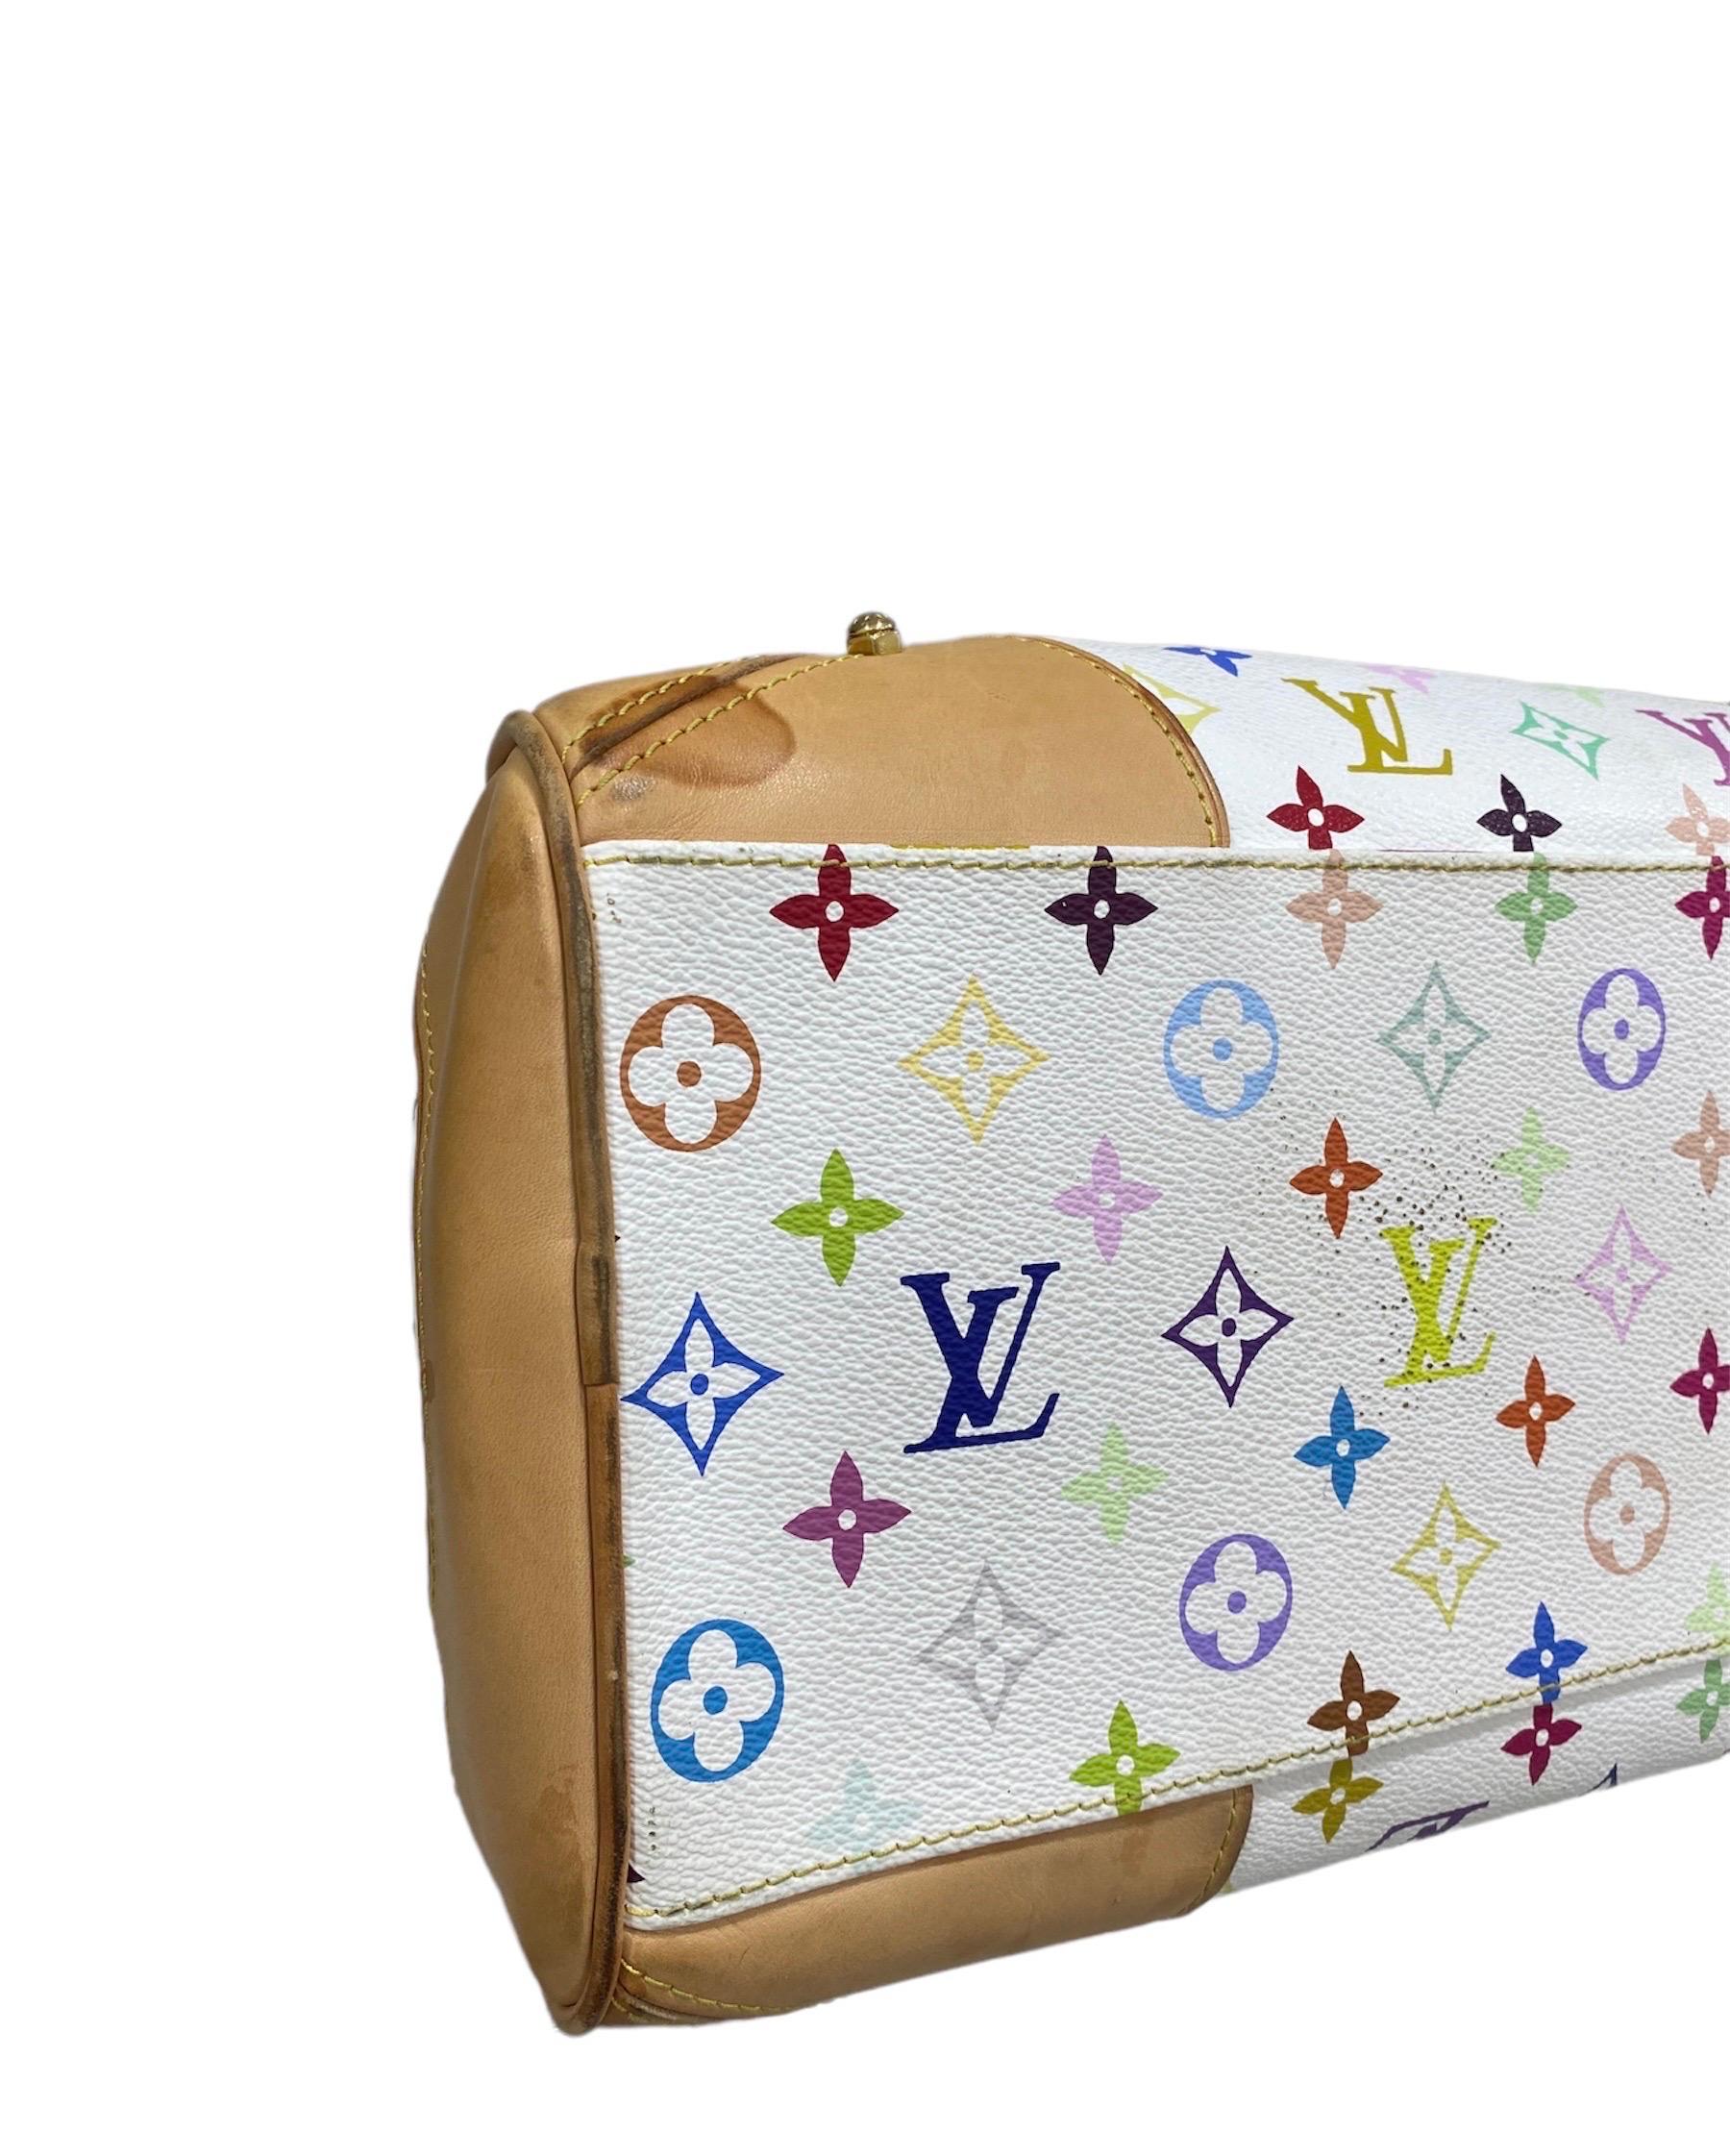 2010 Louis Vuitton Claudia Multicolor Bag Limited Edition Takashi Murakami In Good Condition For Sale In Torre Del Greco, IT